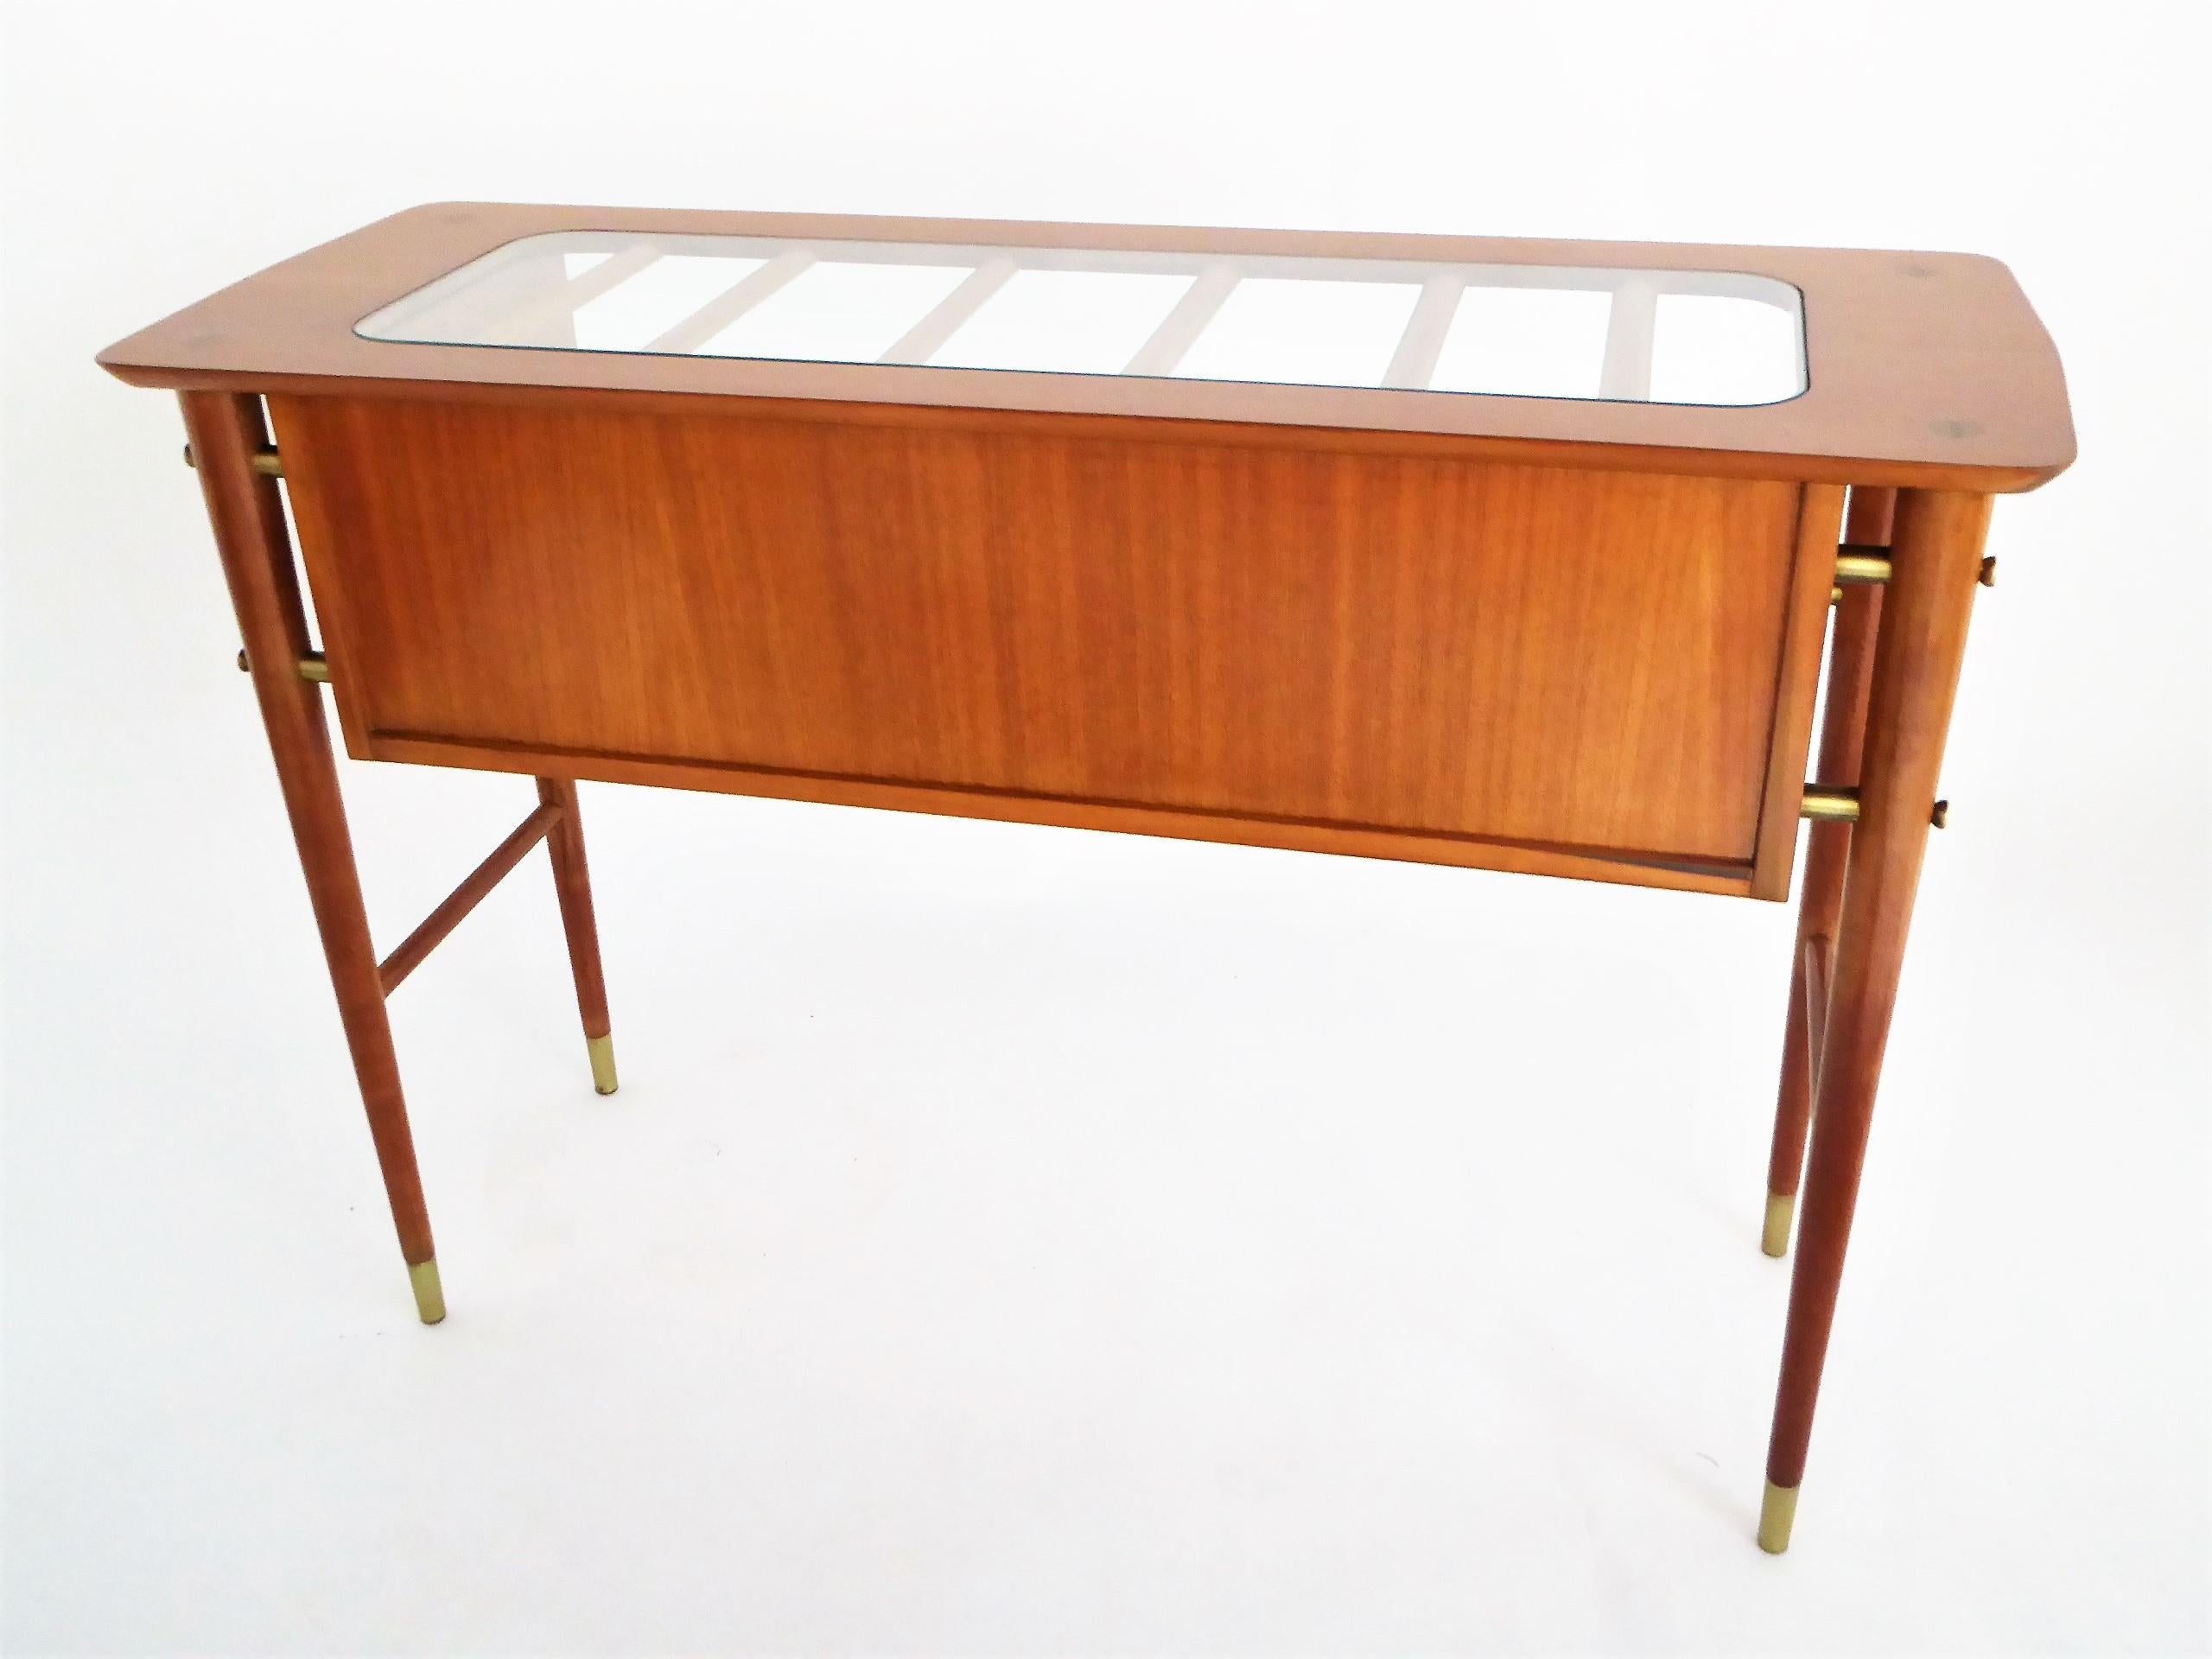 Mid-Century Modern 1950s Gio Ponti Style Petite Console Table with Shelf in Blond Mahogany